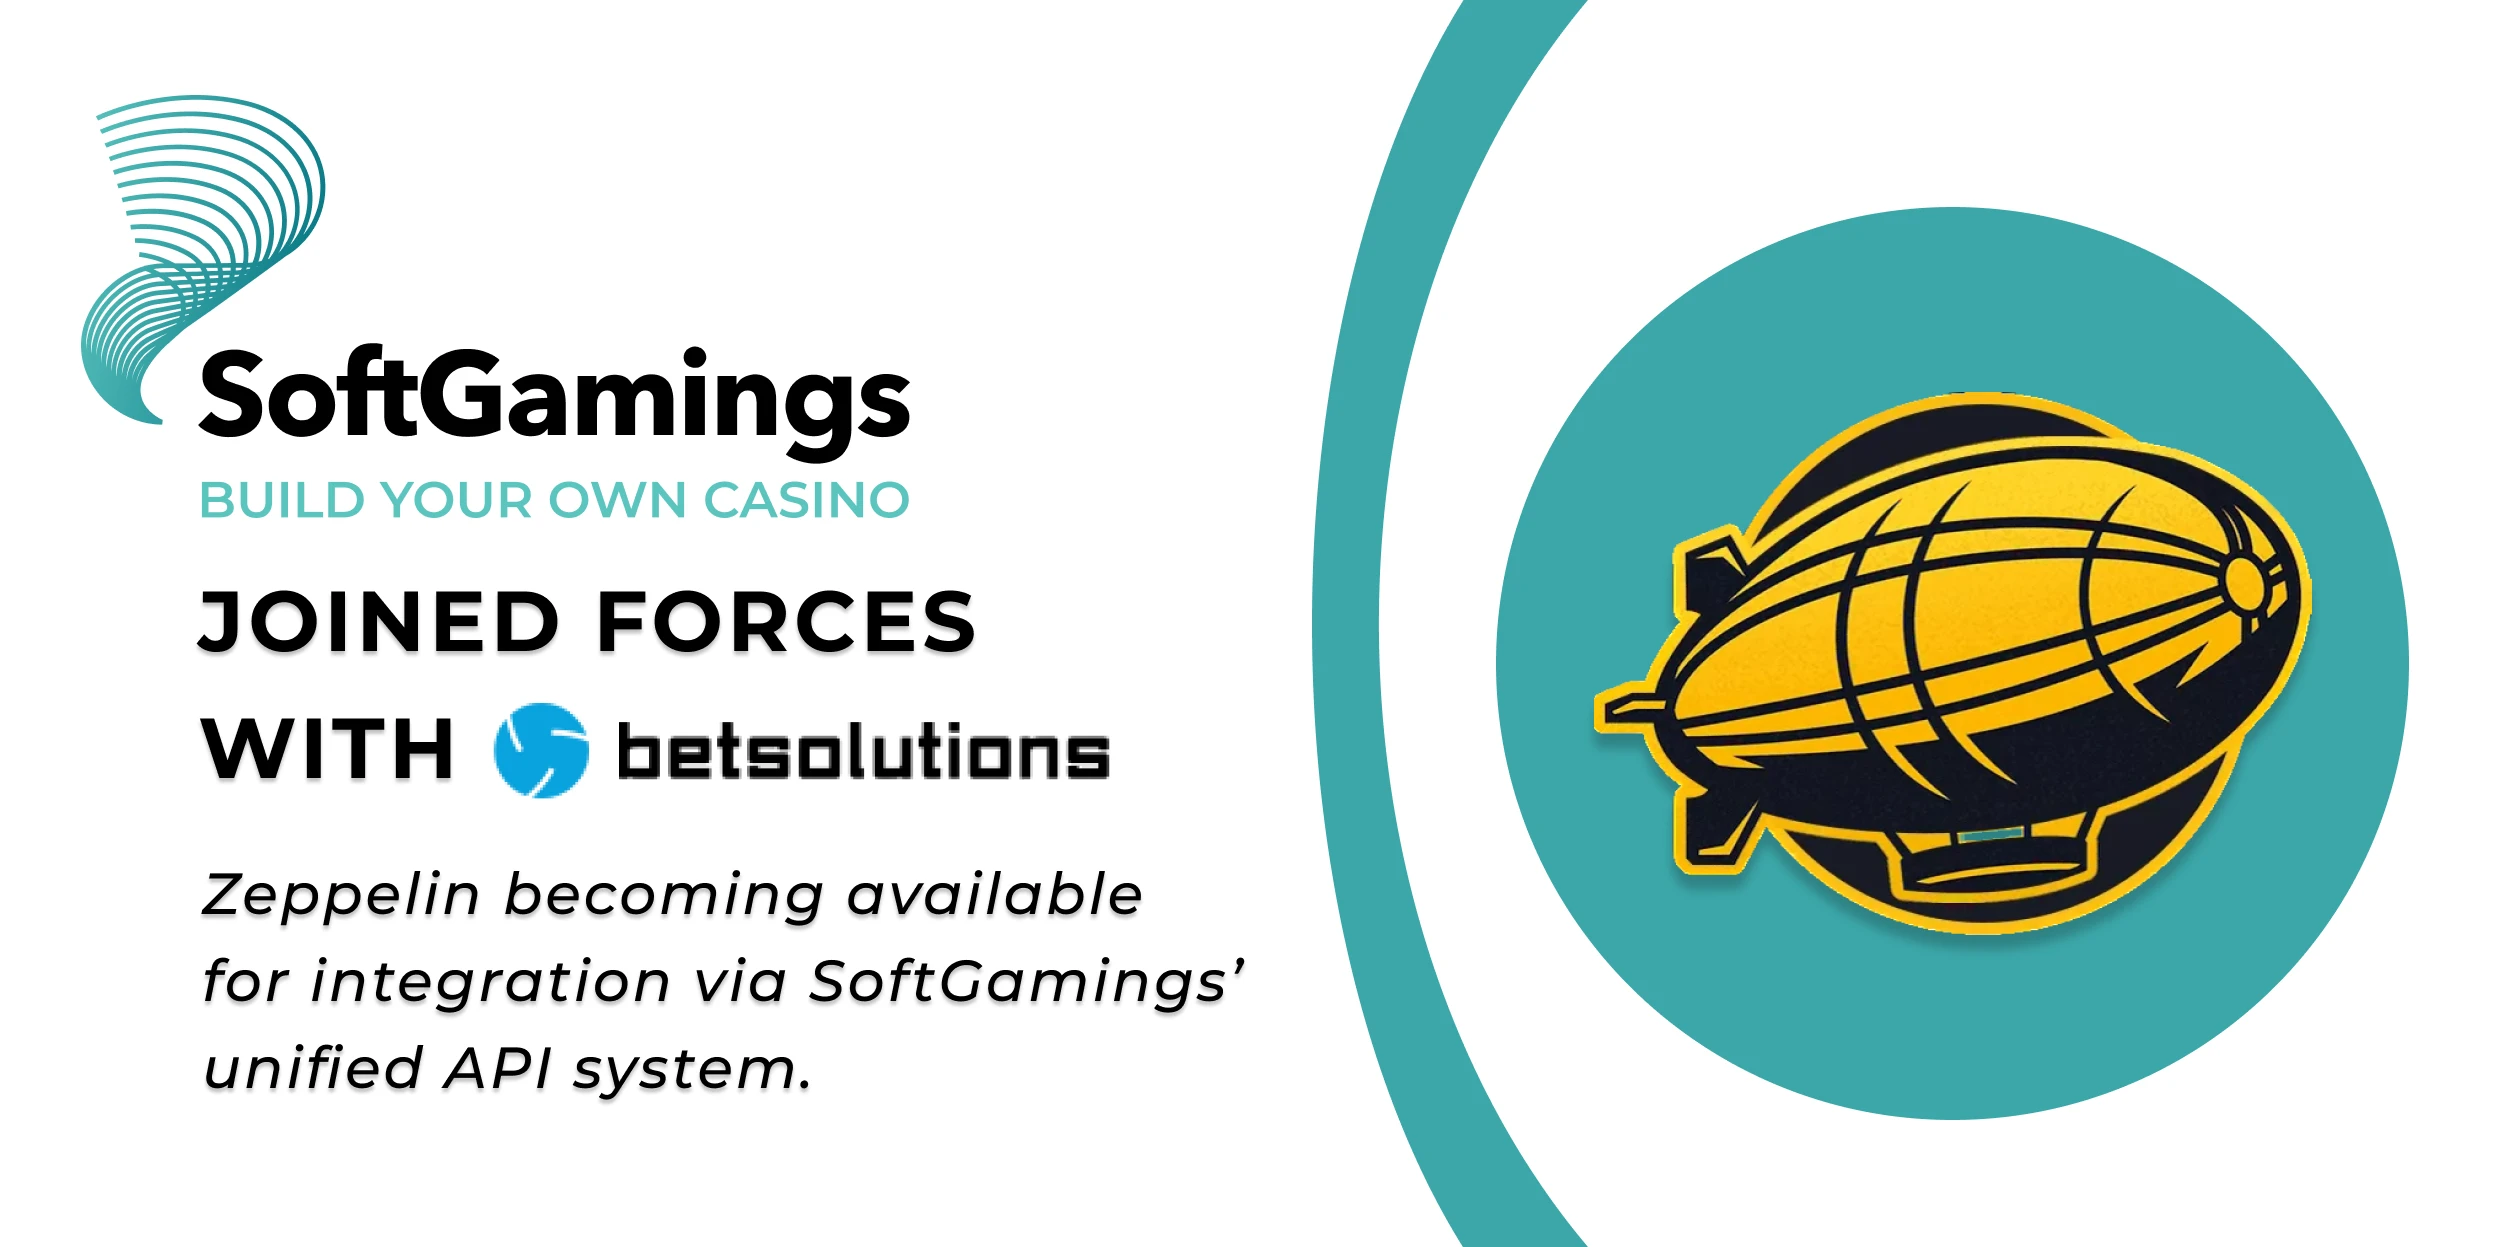 SoftGamings_Betsolutions_header image